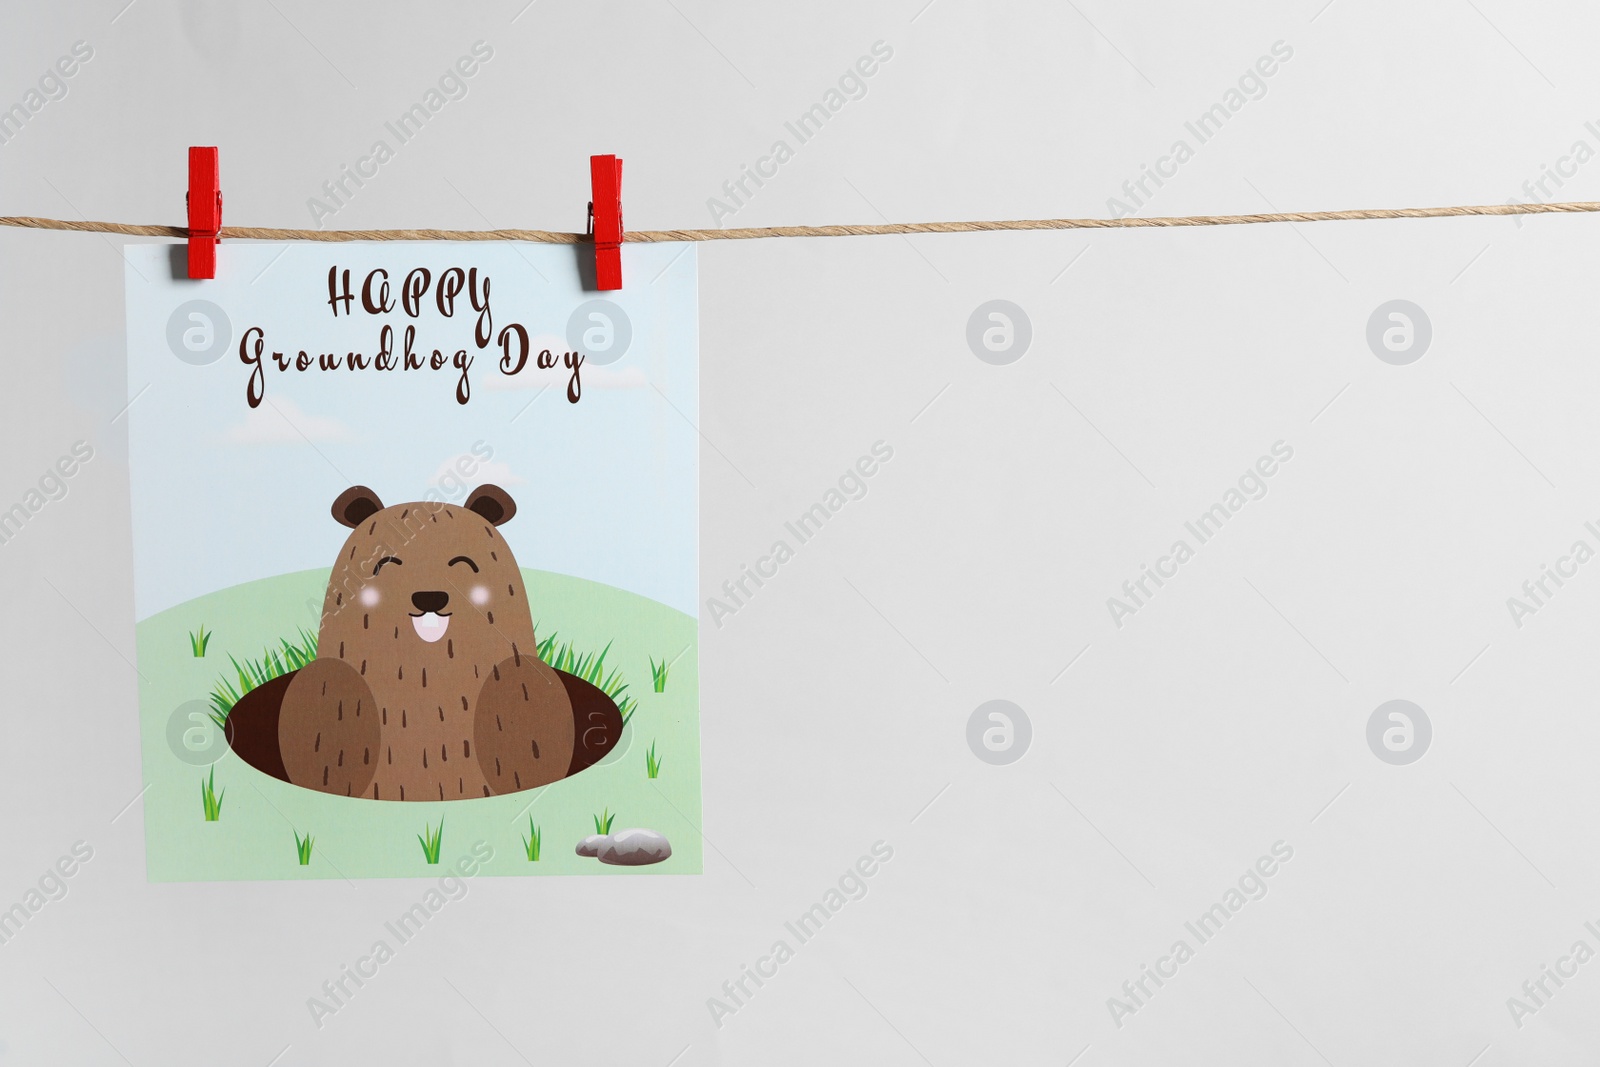 Photo of Happy Groundhog Day greeting card hanging on light background, space for text